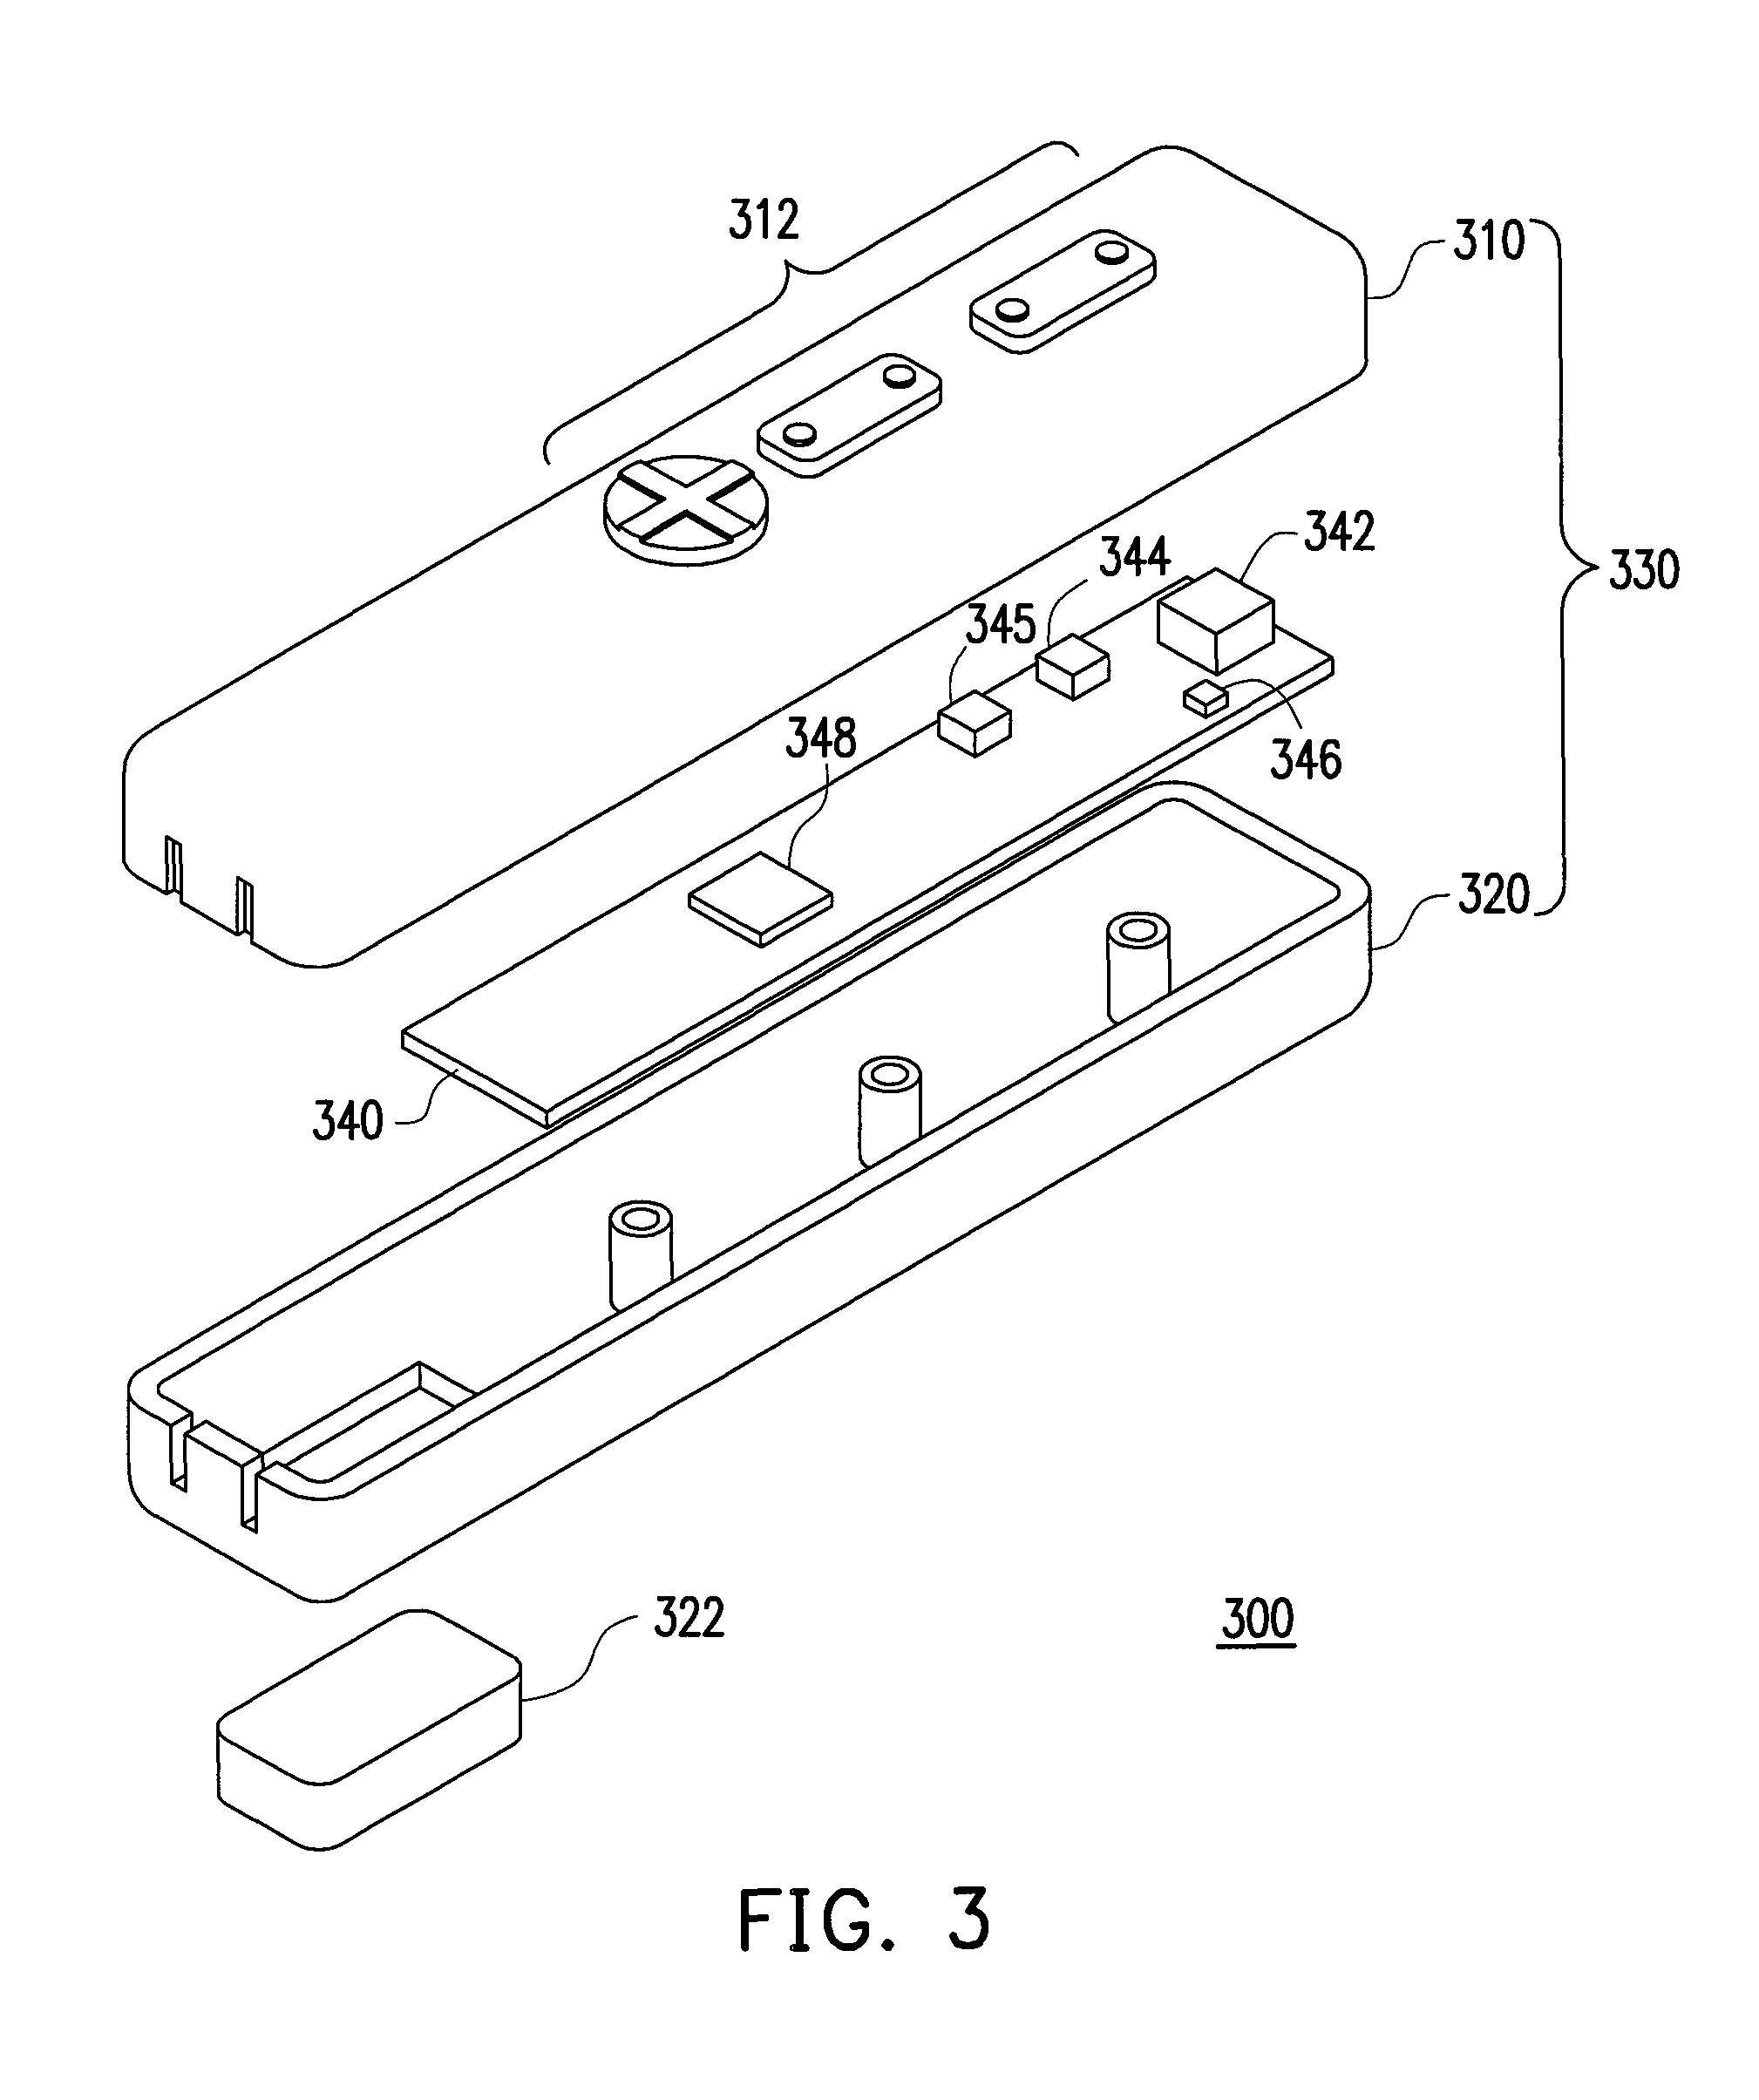 3D pointing device and method for compensating rotations of the 3D pointing device thereof